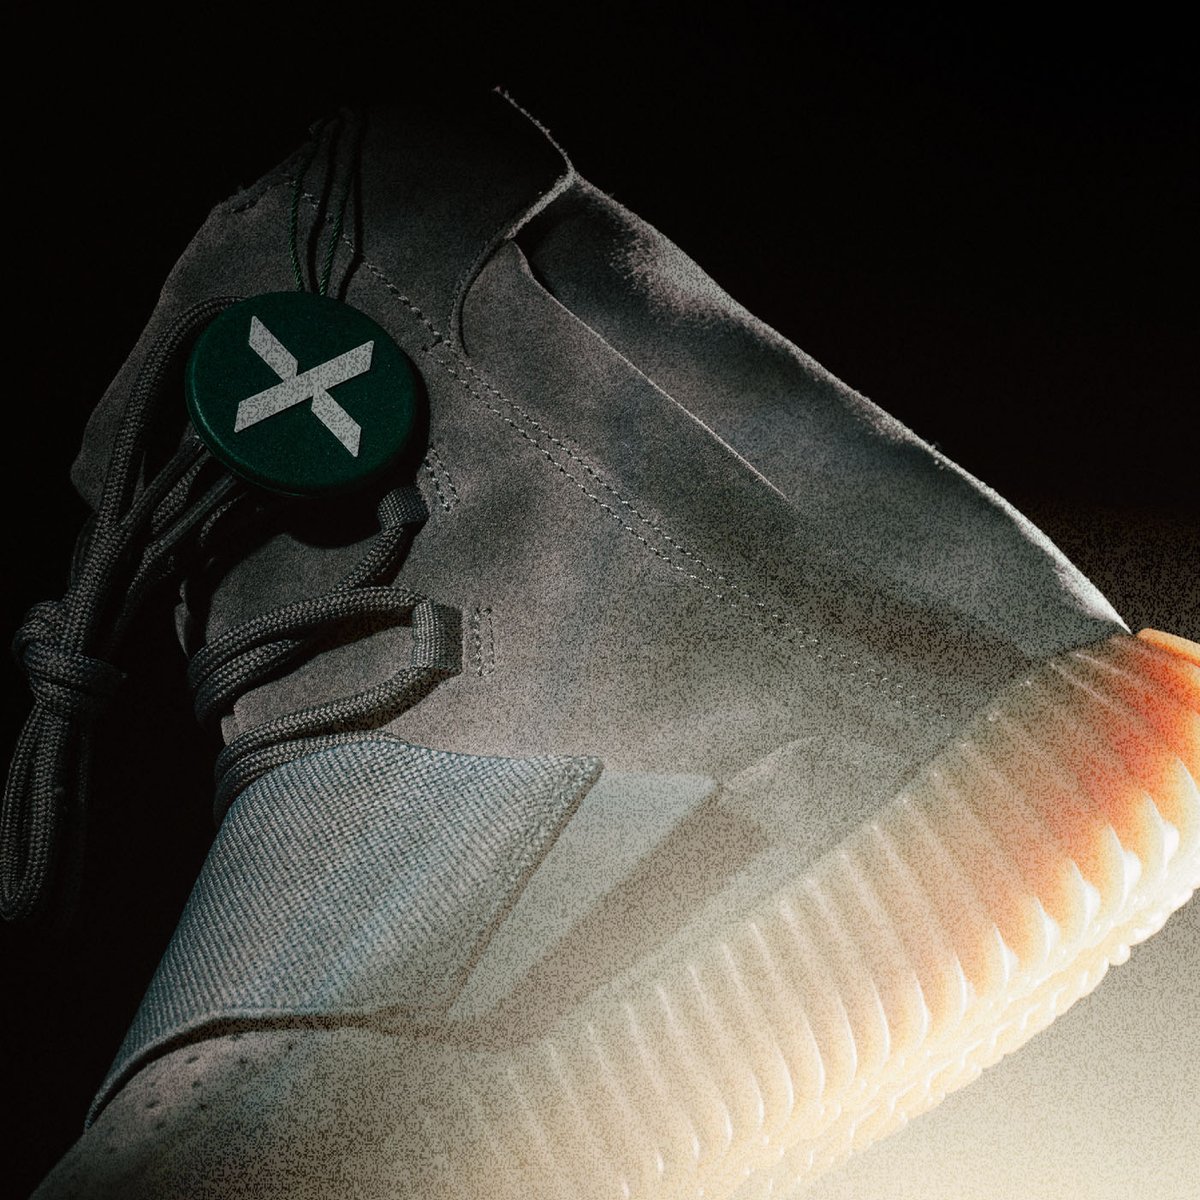 MIDWEEK HEAT DROP 7: adidas Yeezy Boost 750 Light Grey Glow In the Dark 🚨 For just $1, you could take home this grail in the next 24 hours. Place a $1 Bid by 12pm ET on 4/18 and it could be yours. Bid now: bit.ly/4b0NQir